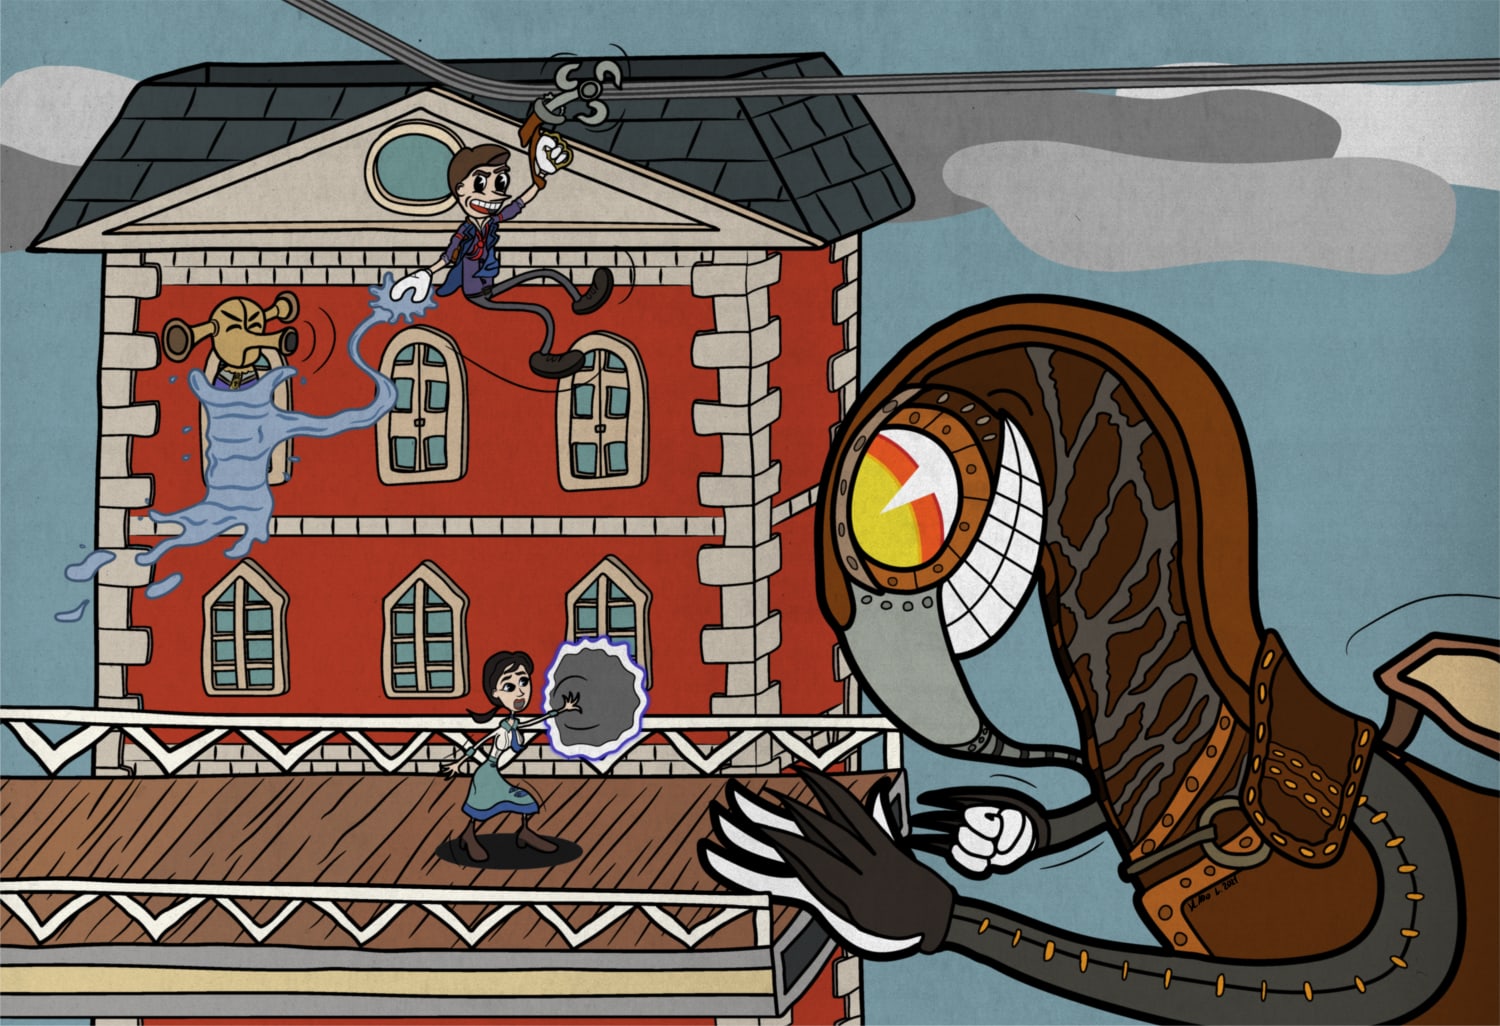 I draw this Bioshock Infinite art inspired by Cuphead/Rubberhose style, took a while to create it, hope you will like it